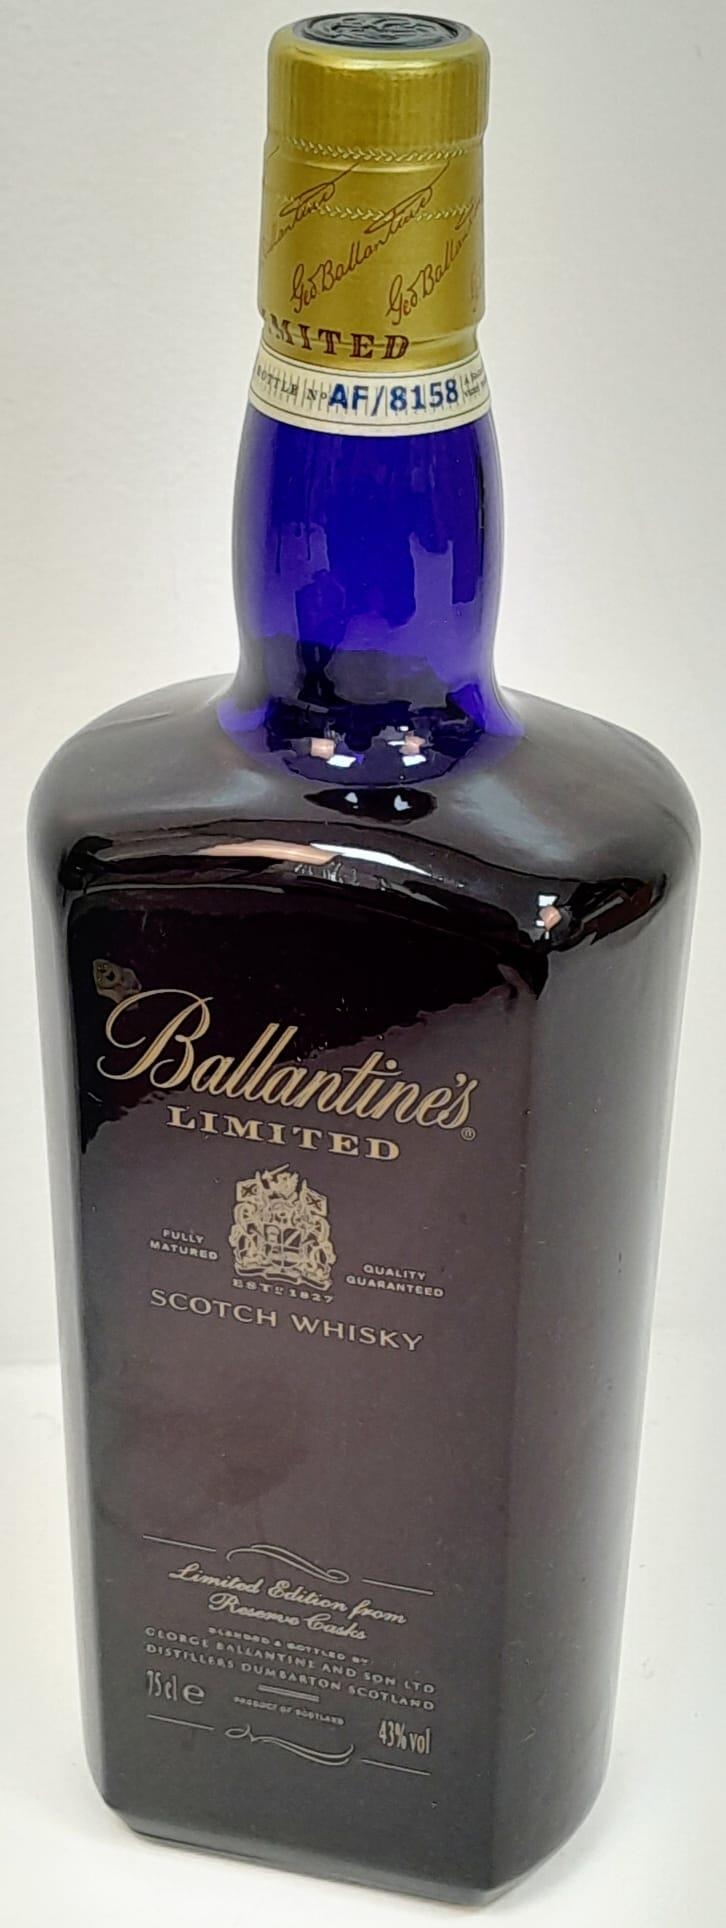 A Presentation Boxed and Sealed, Certified Limited Edition Ballantines Scotch Whisky (Circa 2000- - Image 2 of 5